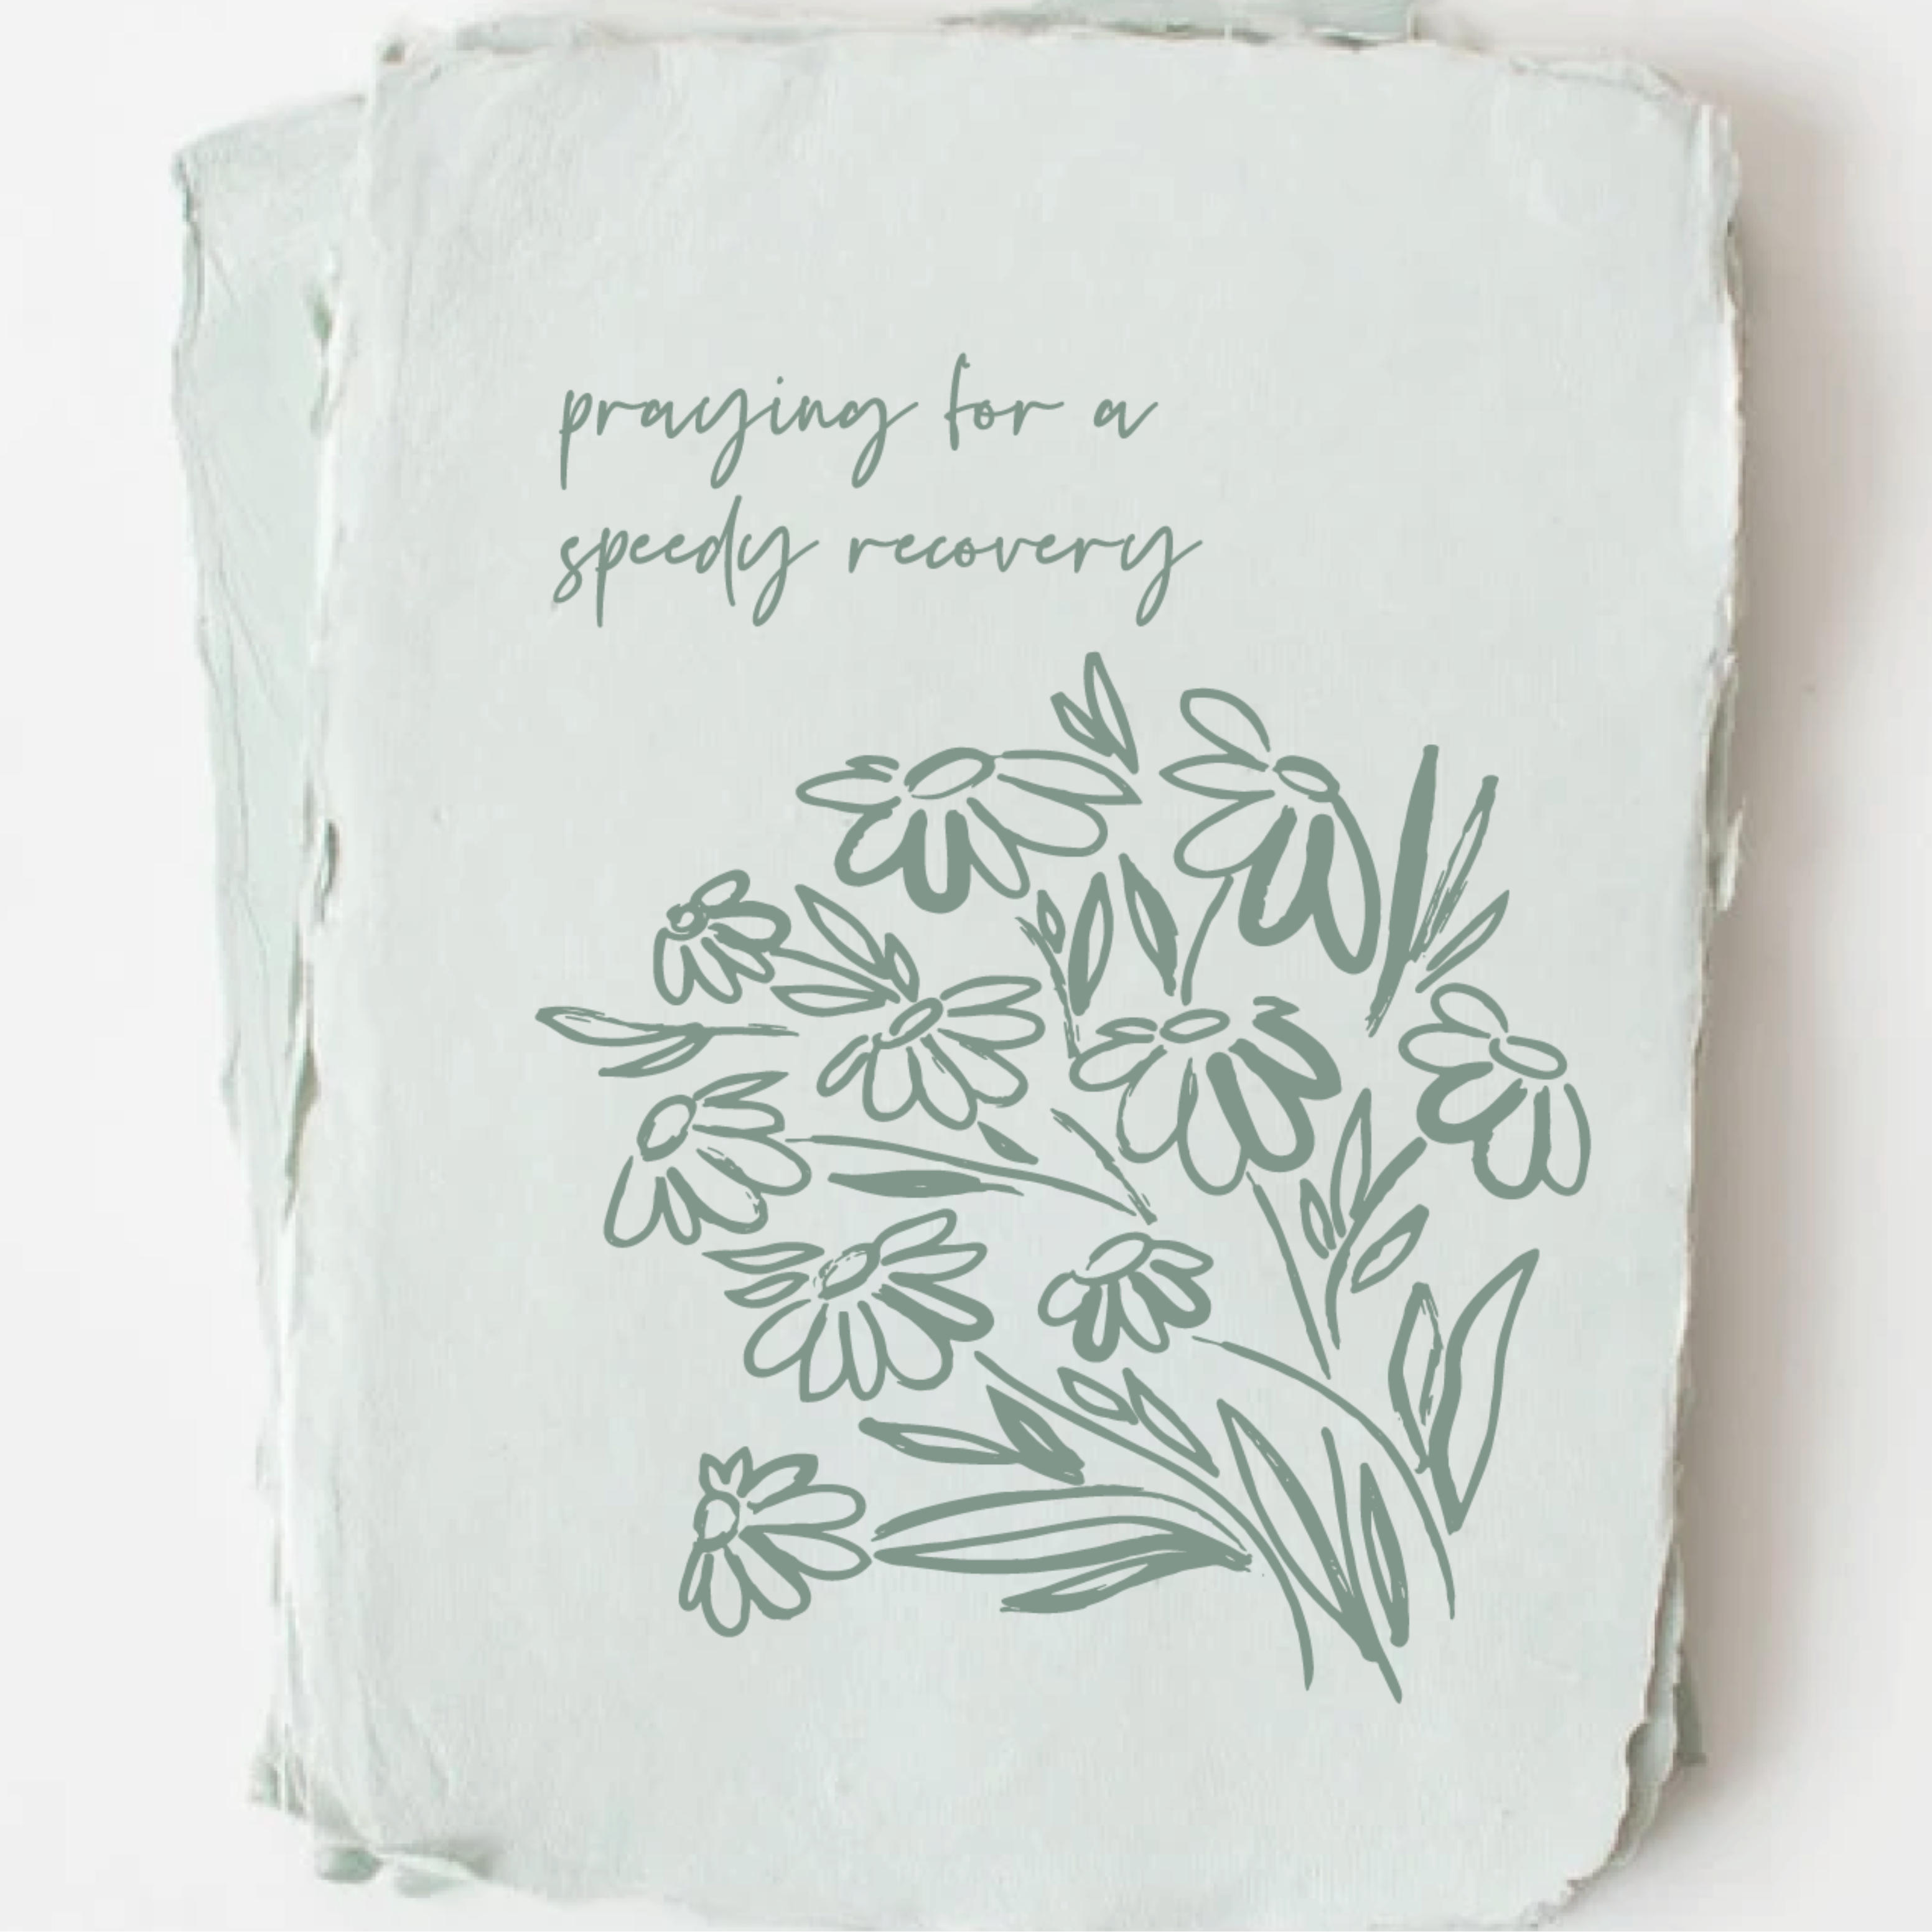 "Praying for a speedy recovery" Get Well Greeting Card